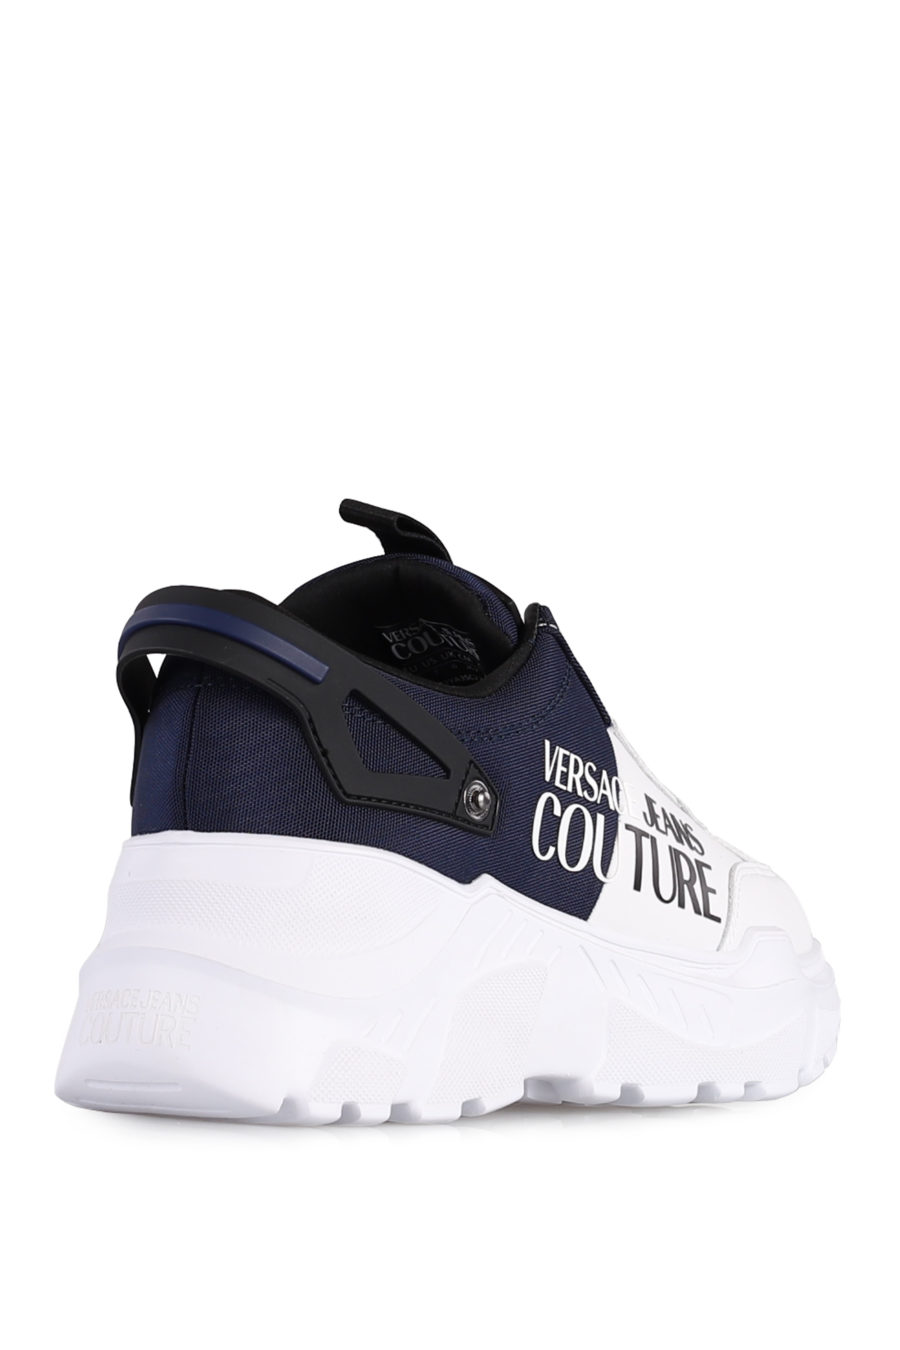 Shoes "Speedtrack" in white and blue - IMG 1044